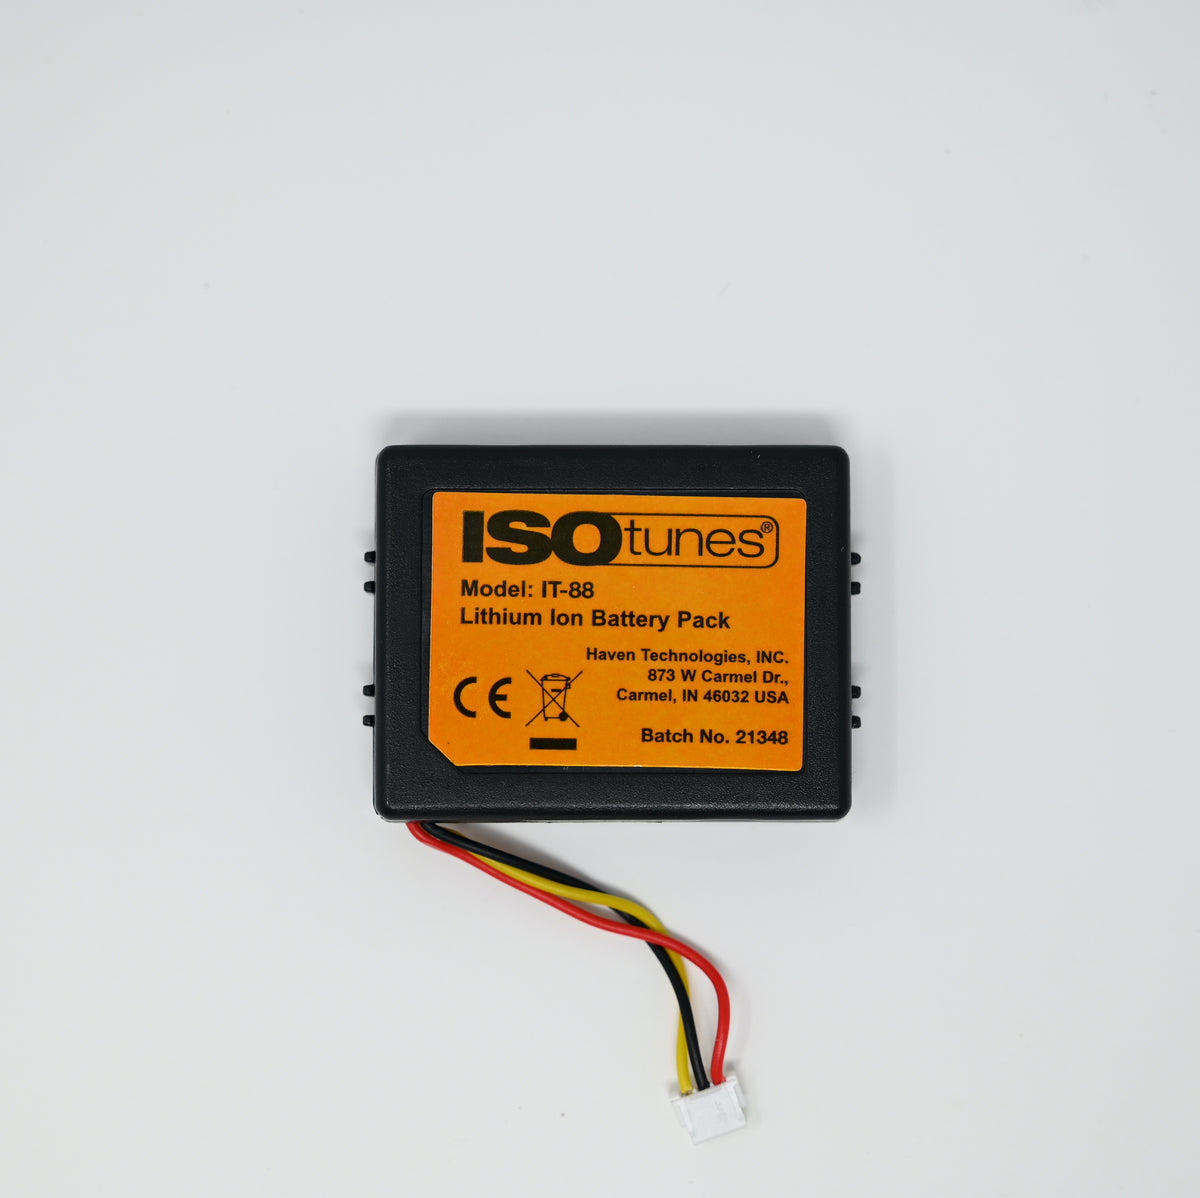 ISOtunes Lithium Ion Batter LINK 2 LINK Aware 